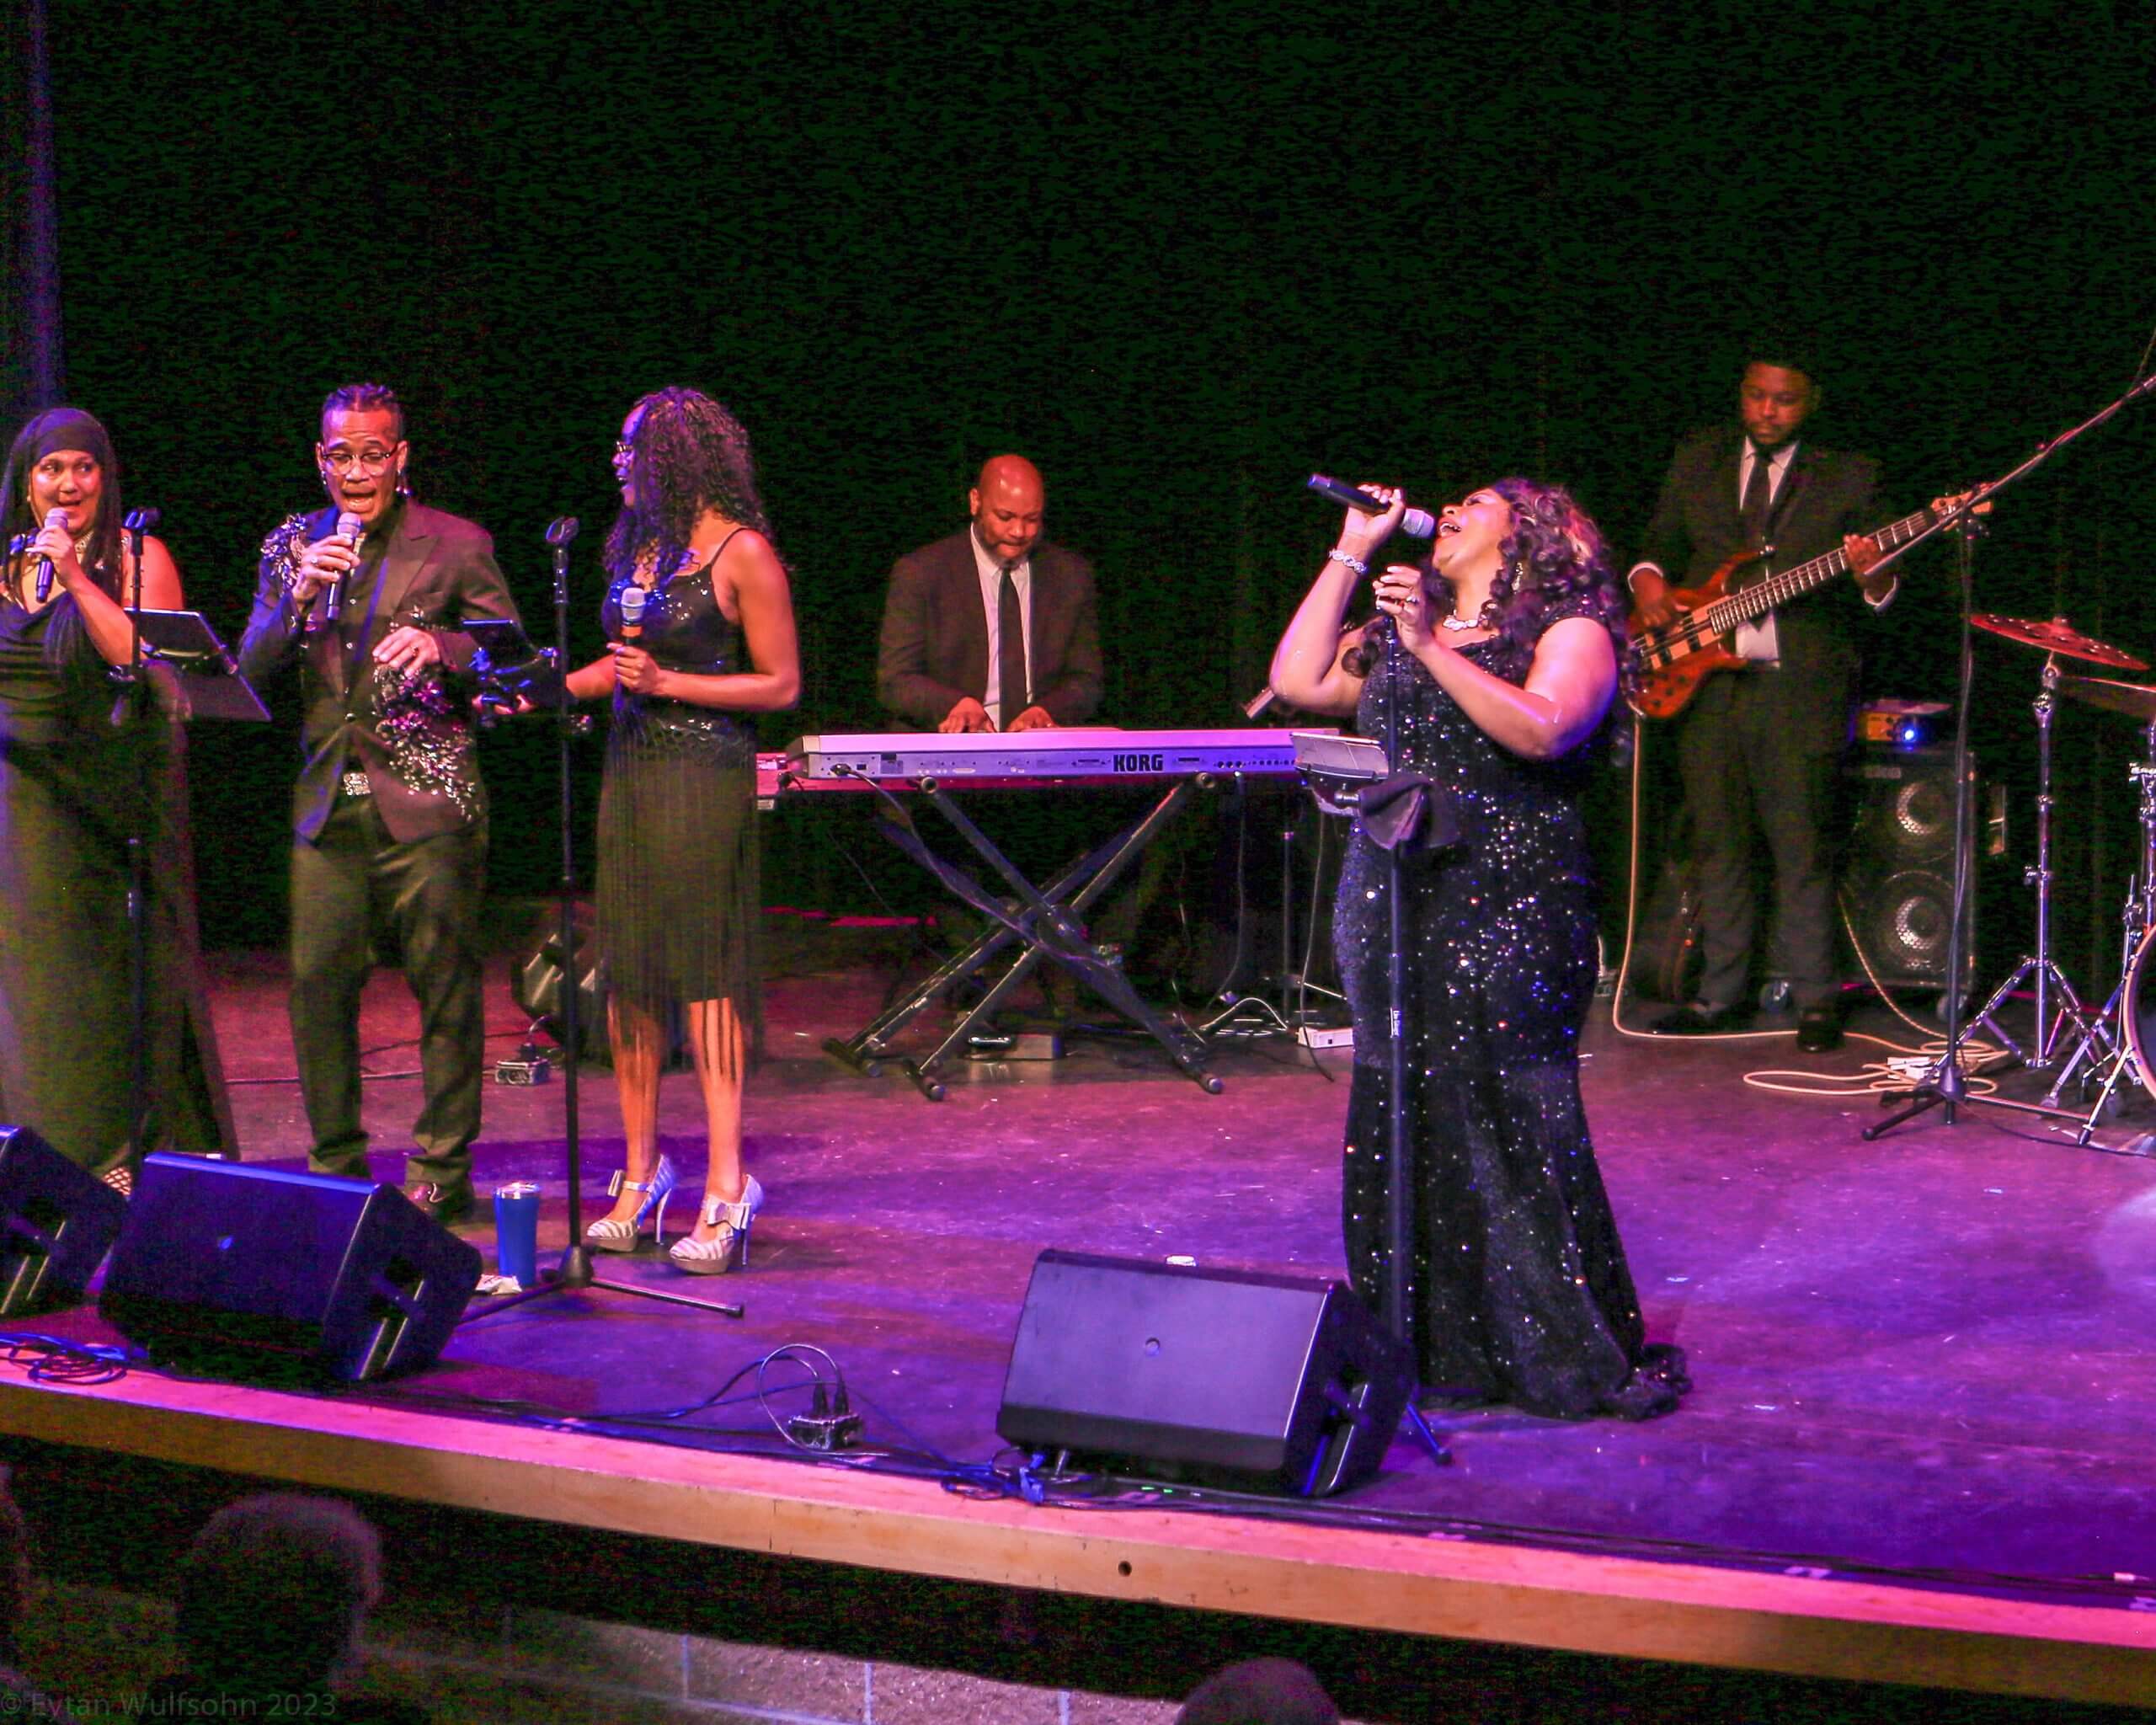 A woman singing on stage with other people.